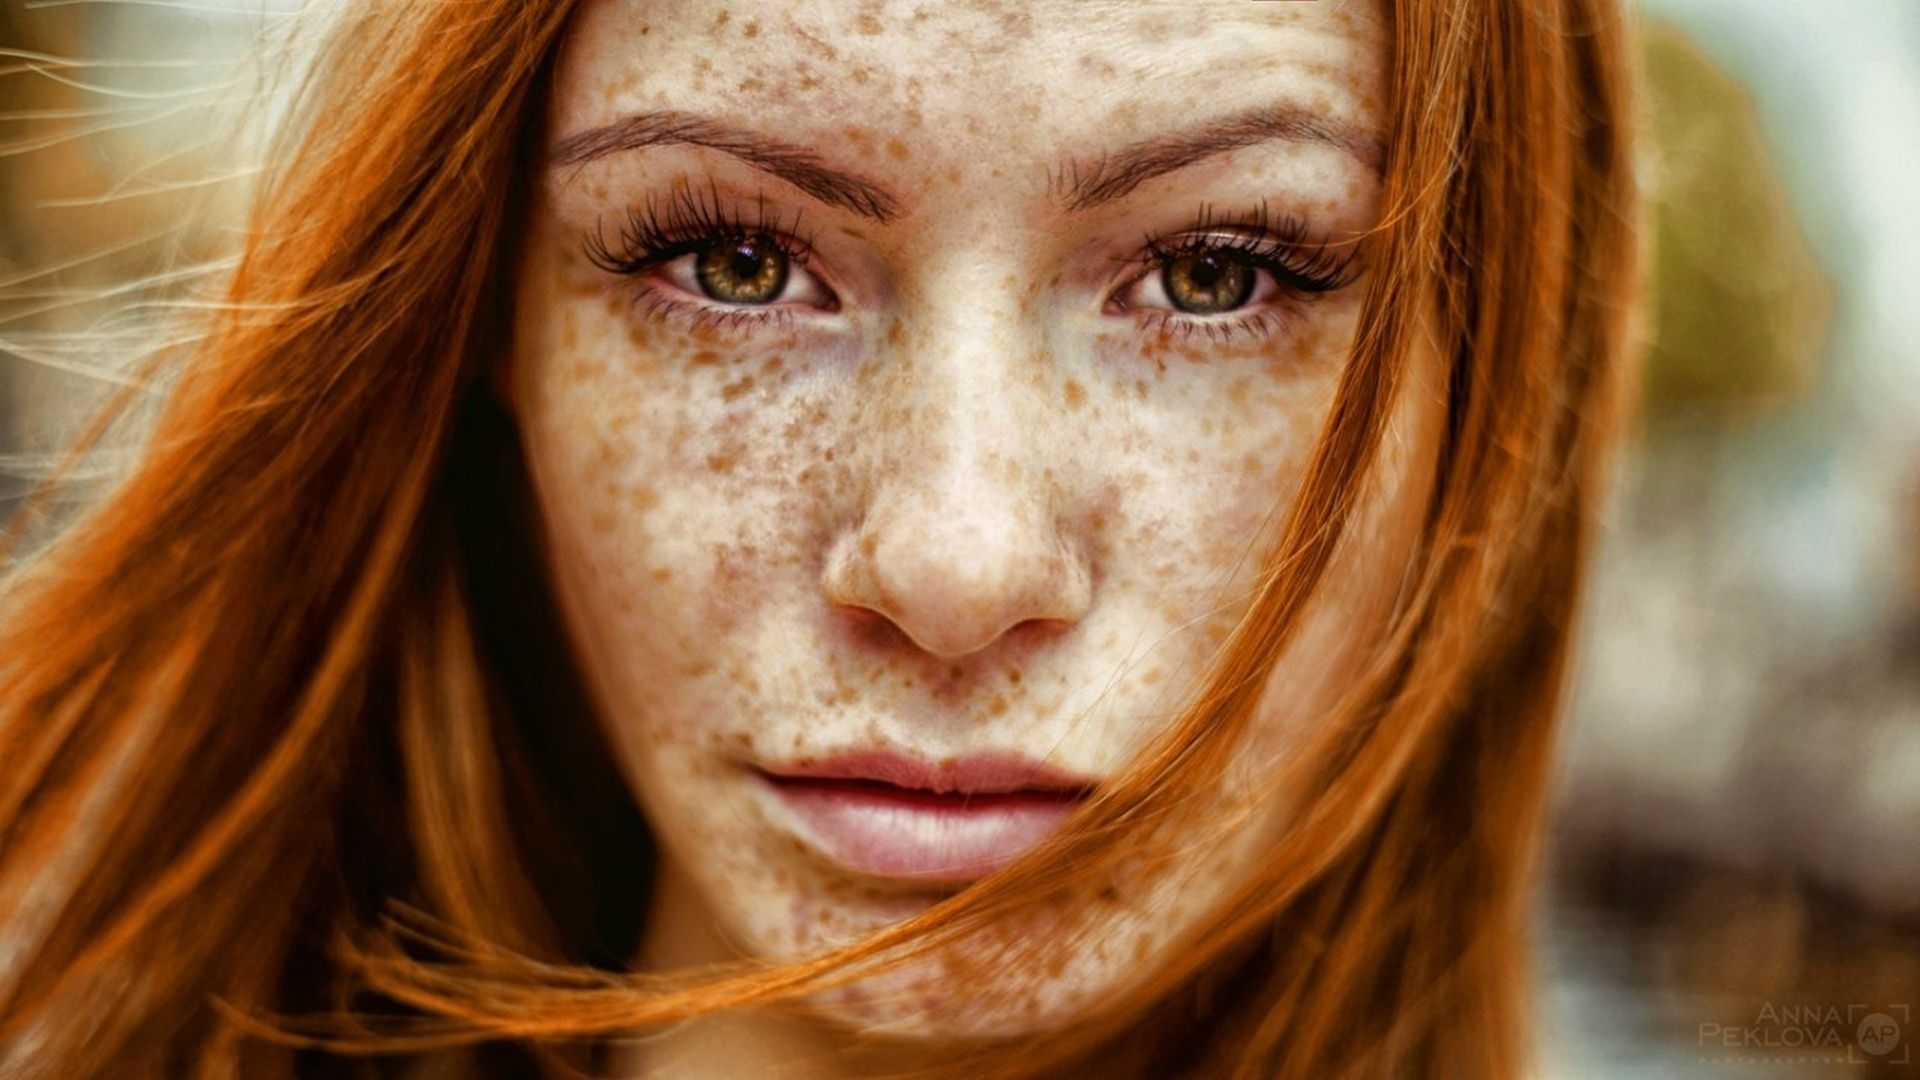 Freckled girl wallpaper and image .com